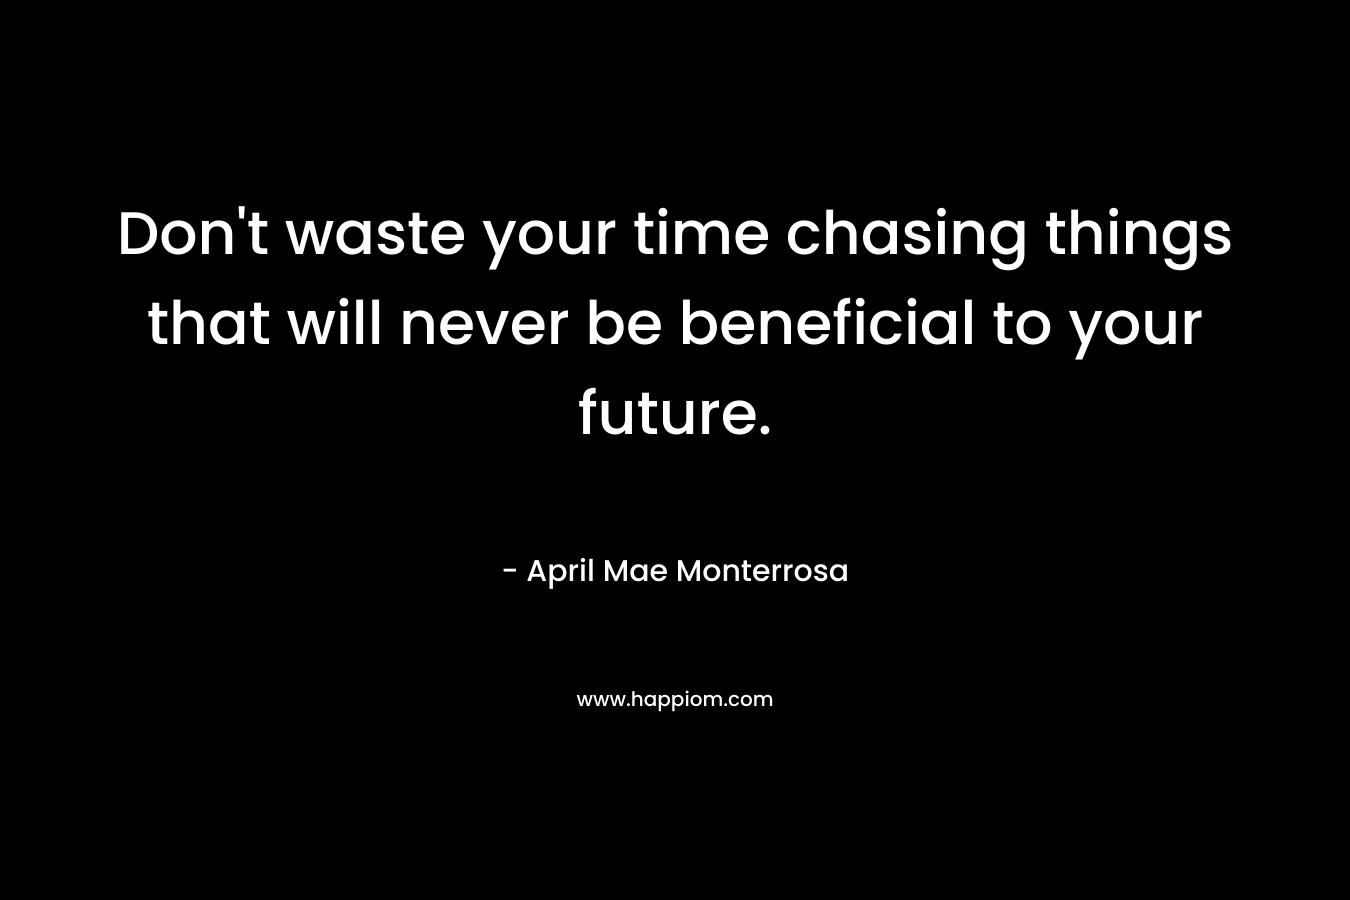 Don't waste your time chasing things that will never be beneficial to your future.